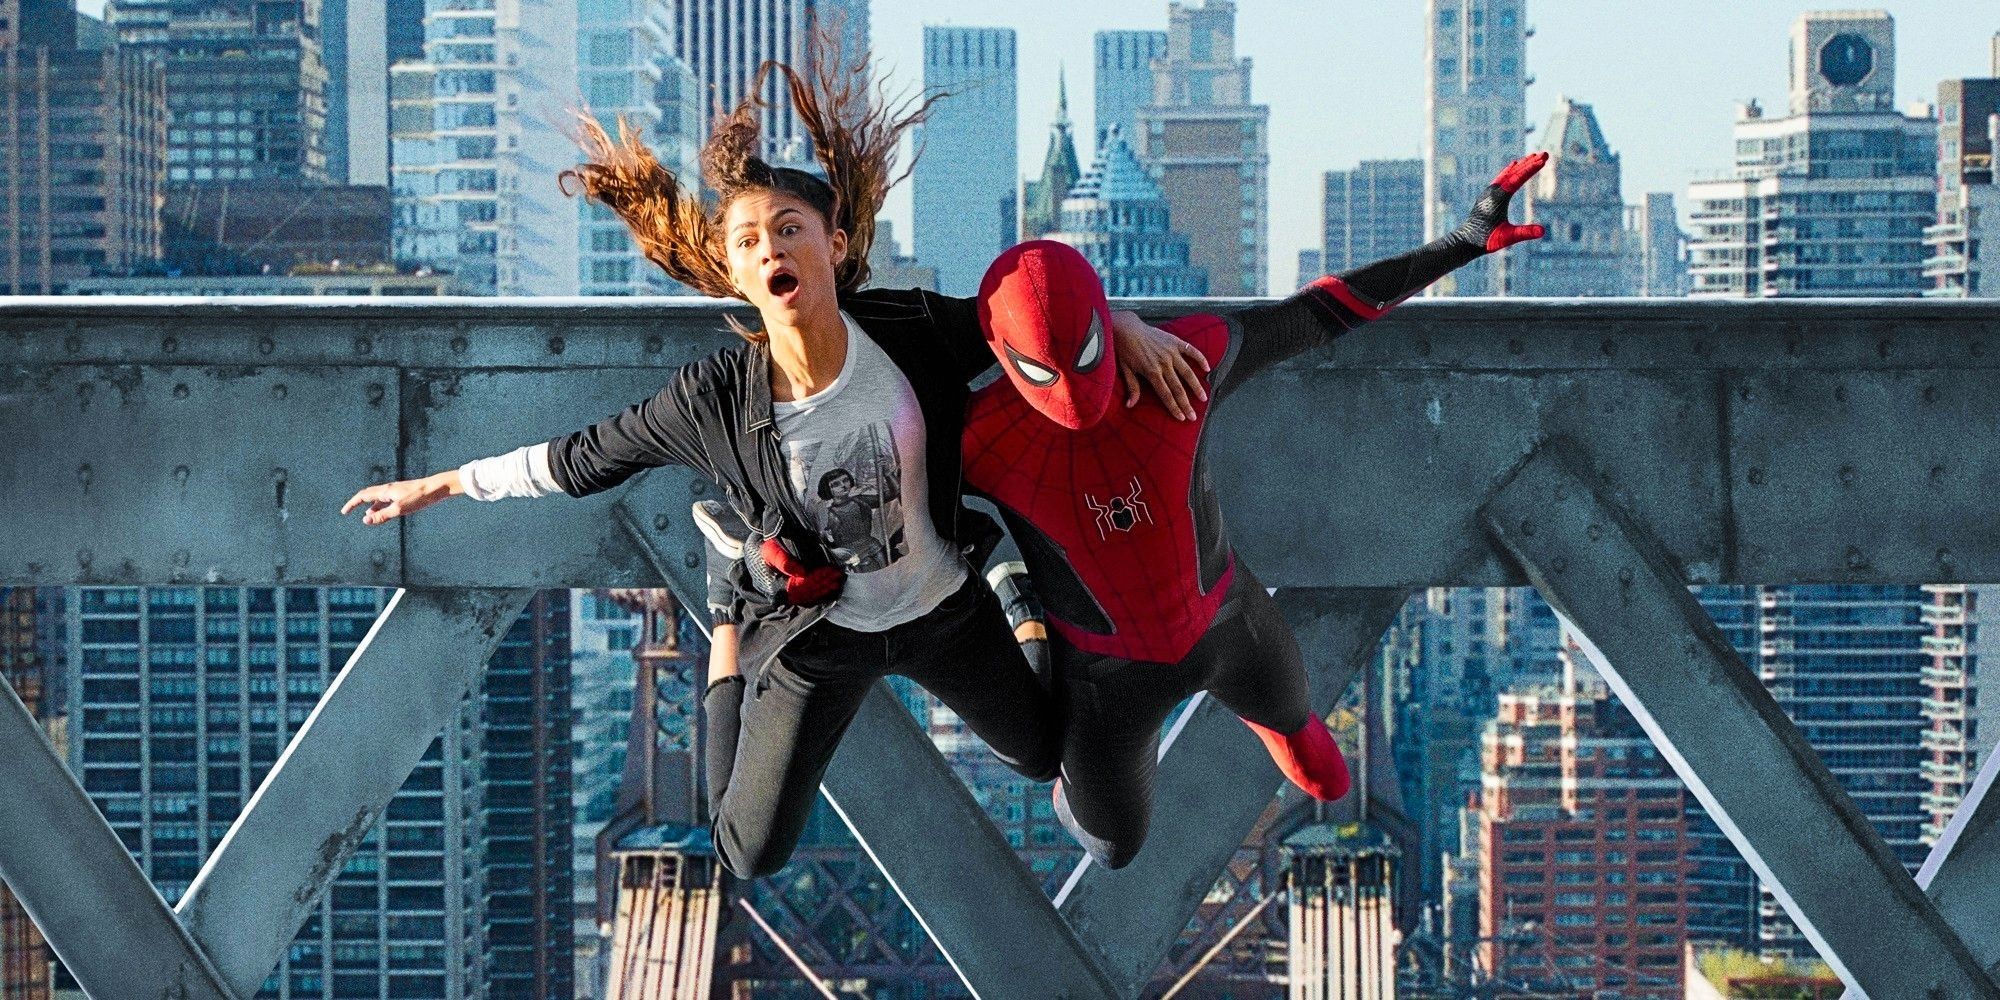 Zendaya and Tom Holland gliding in the air in Spider Man No Way Home